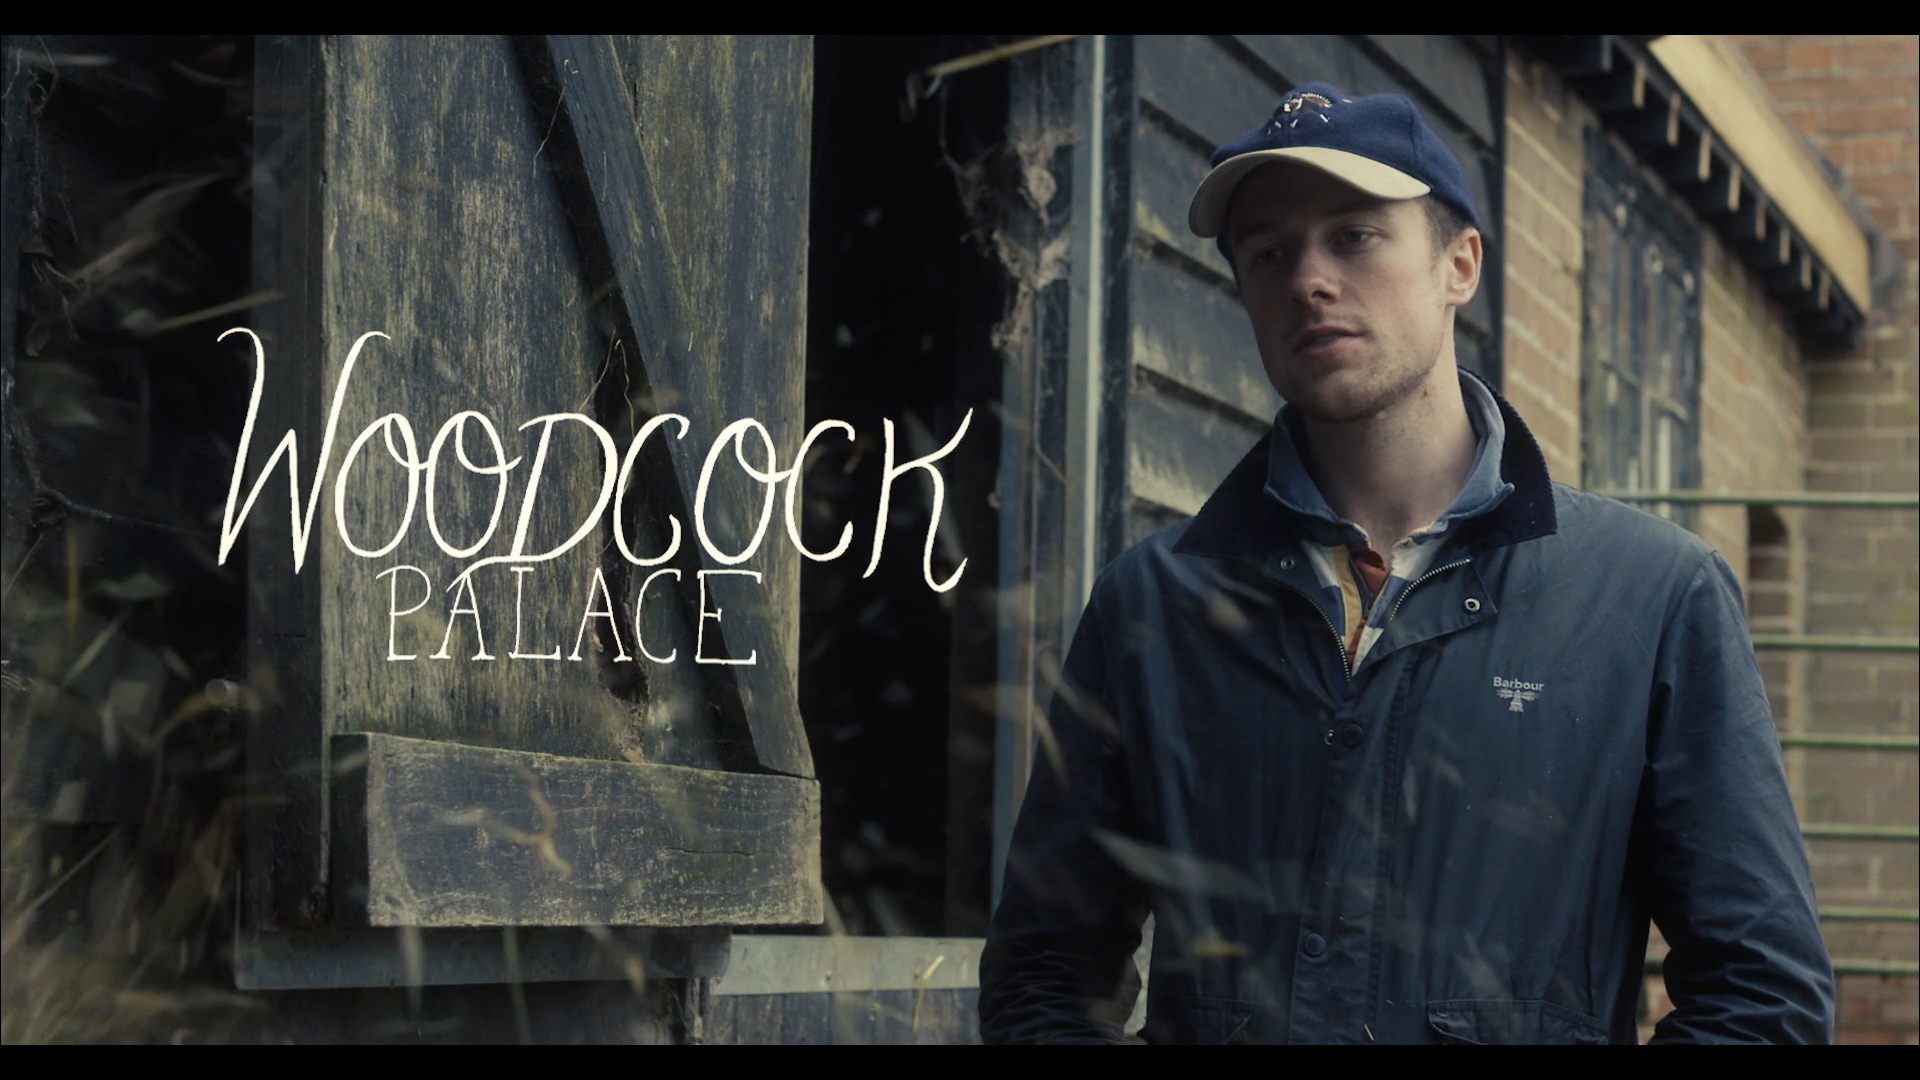 'Woodcock Palace' is my final film for Year 3 Film and Moving Image. It explores themes of family and confronting the past.